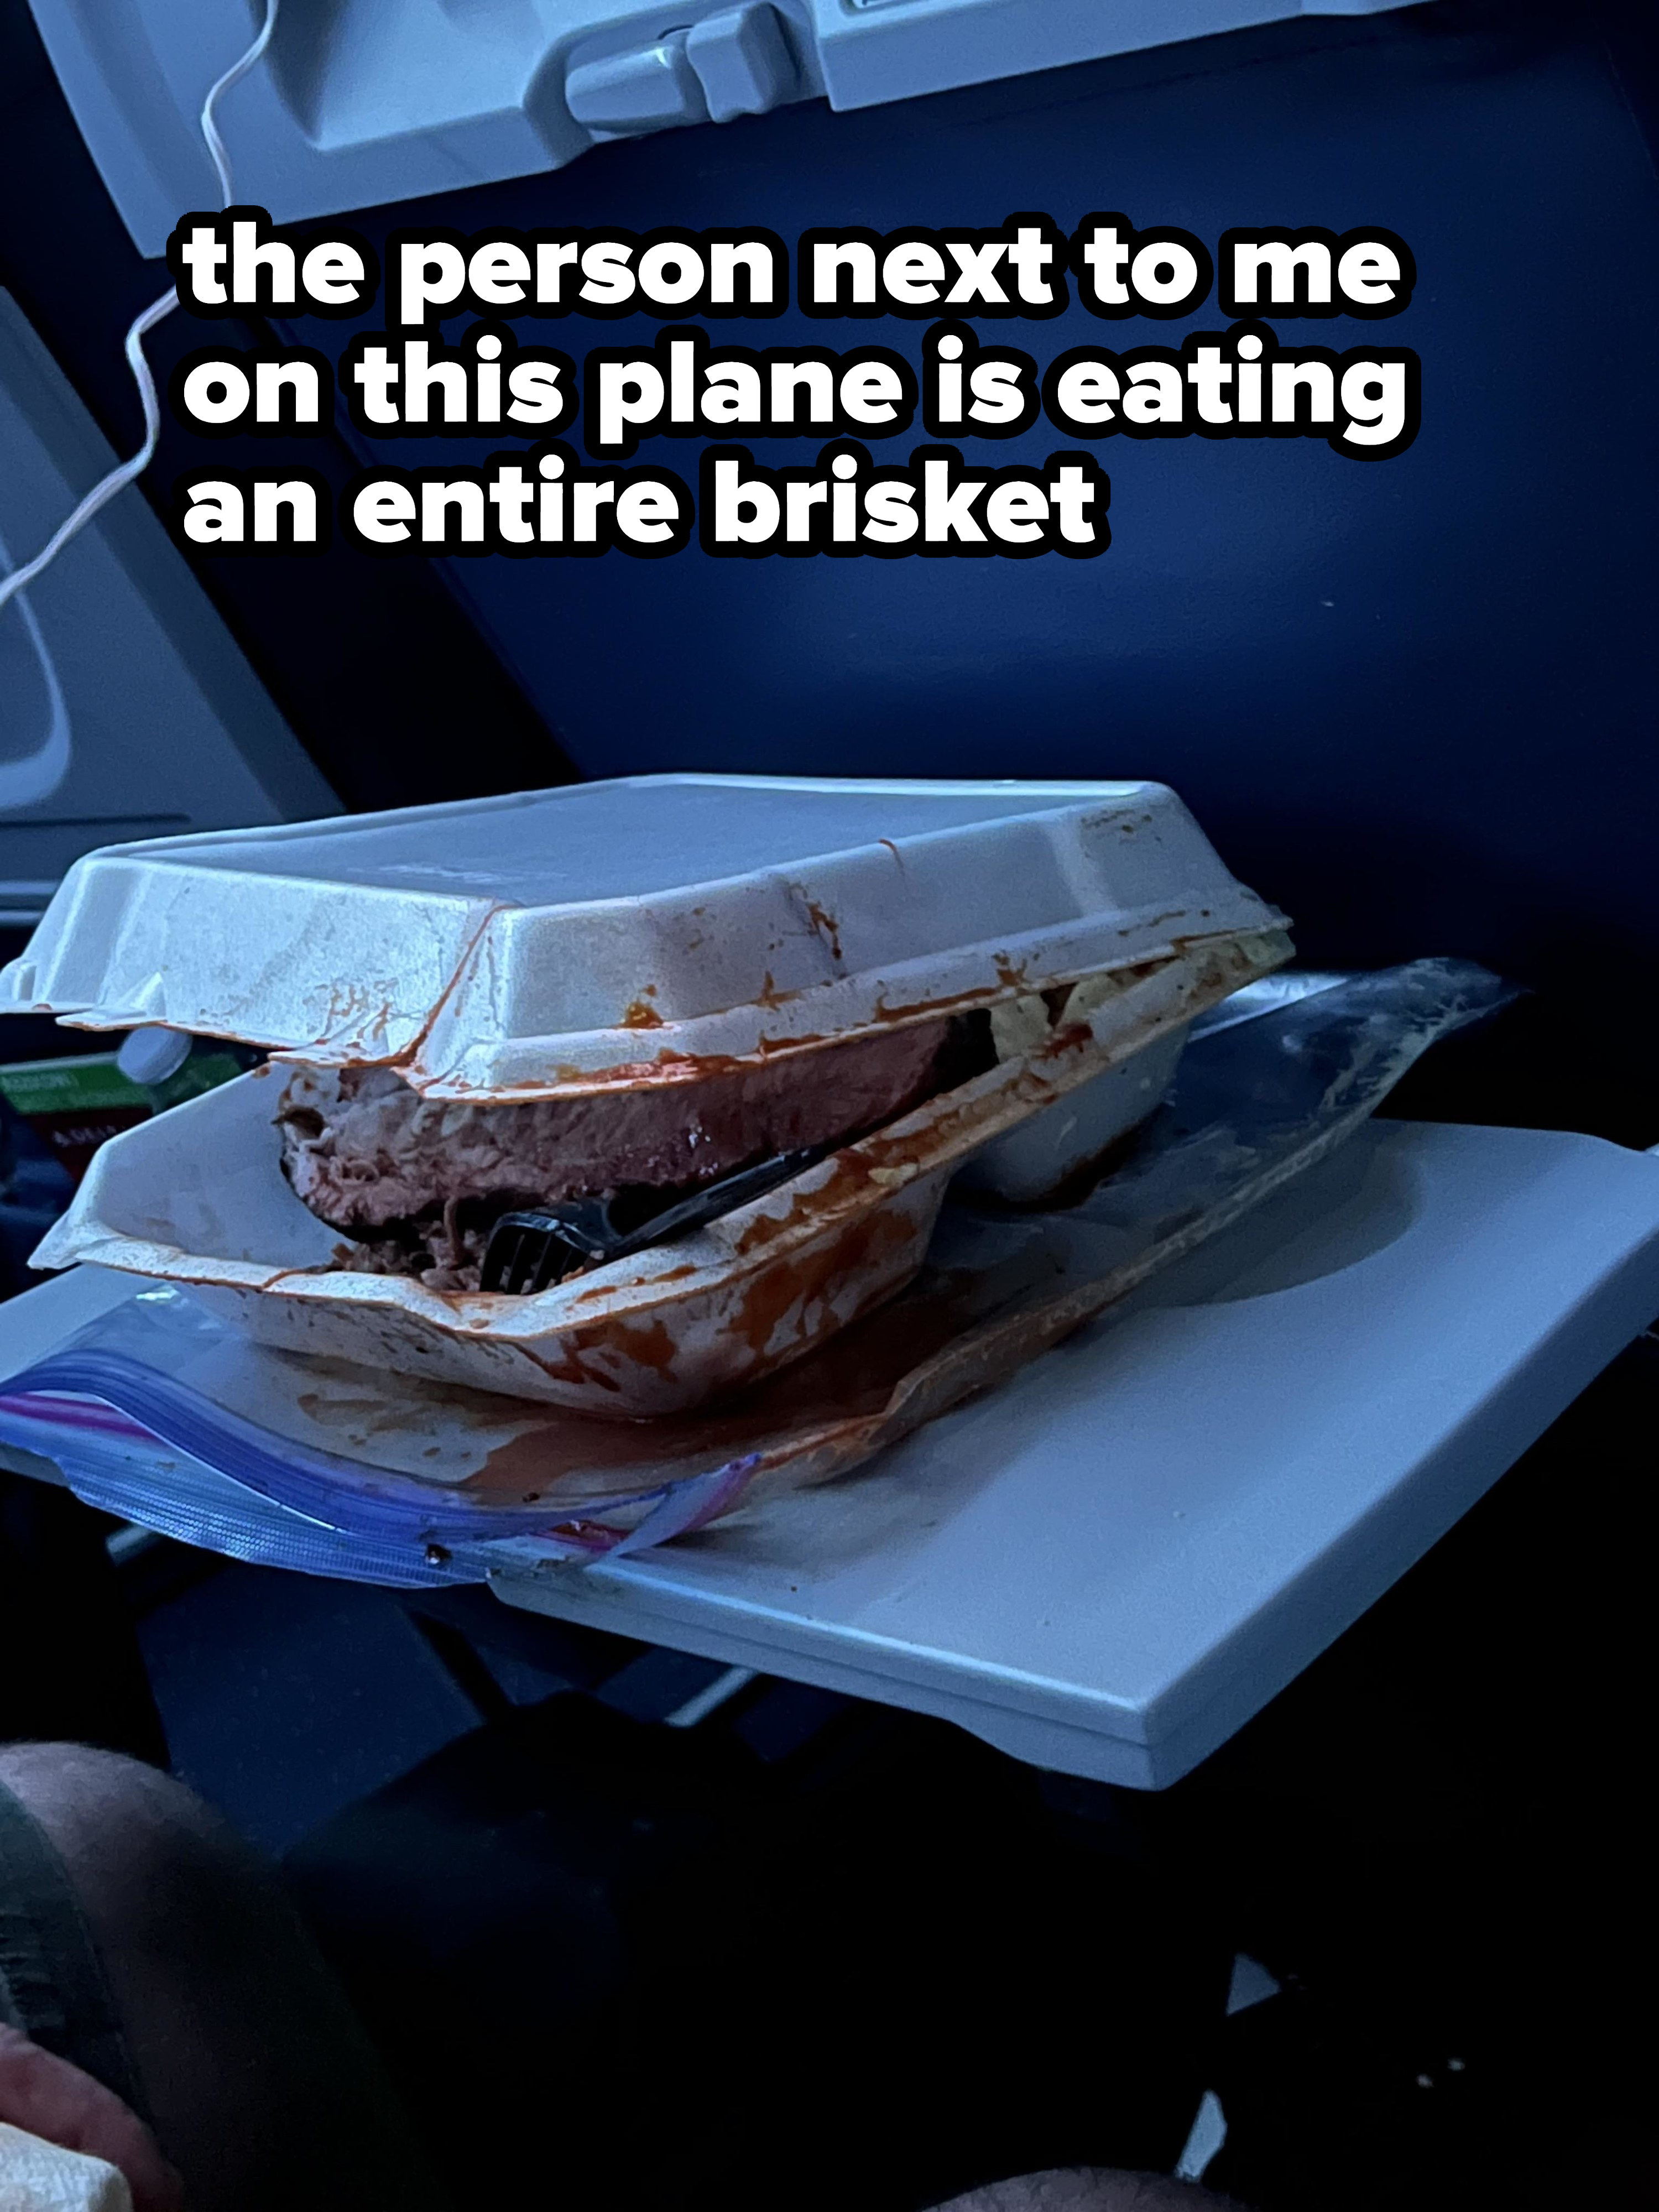 A Styrofoam container with a large piece of meat and gravy/blood extending over the sides and onto the plane&#x27;s seat tray